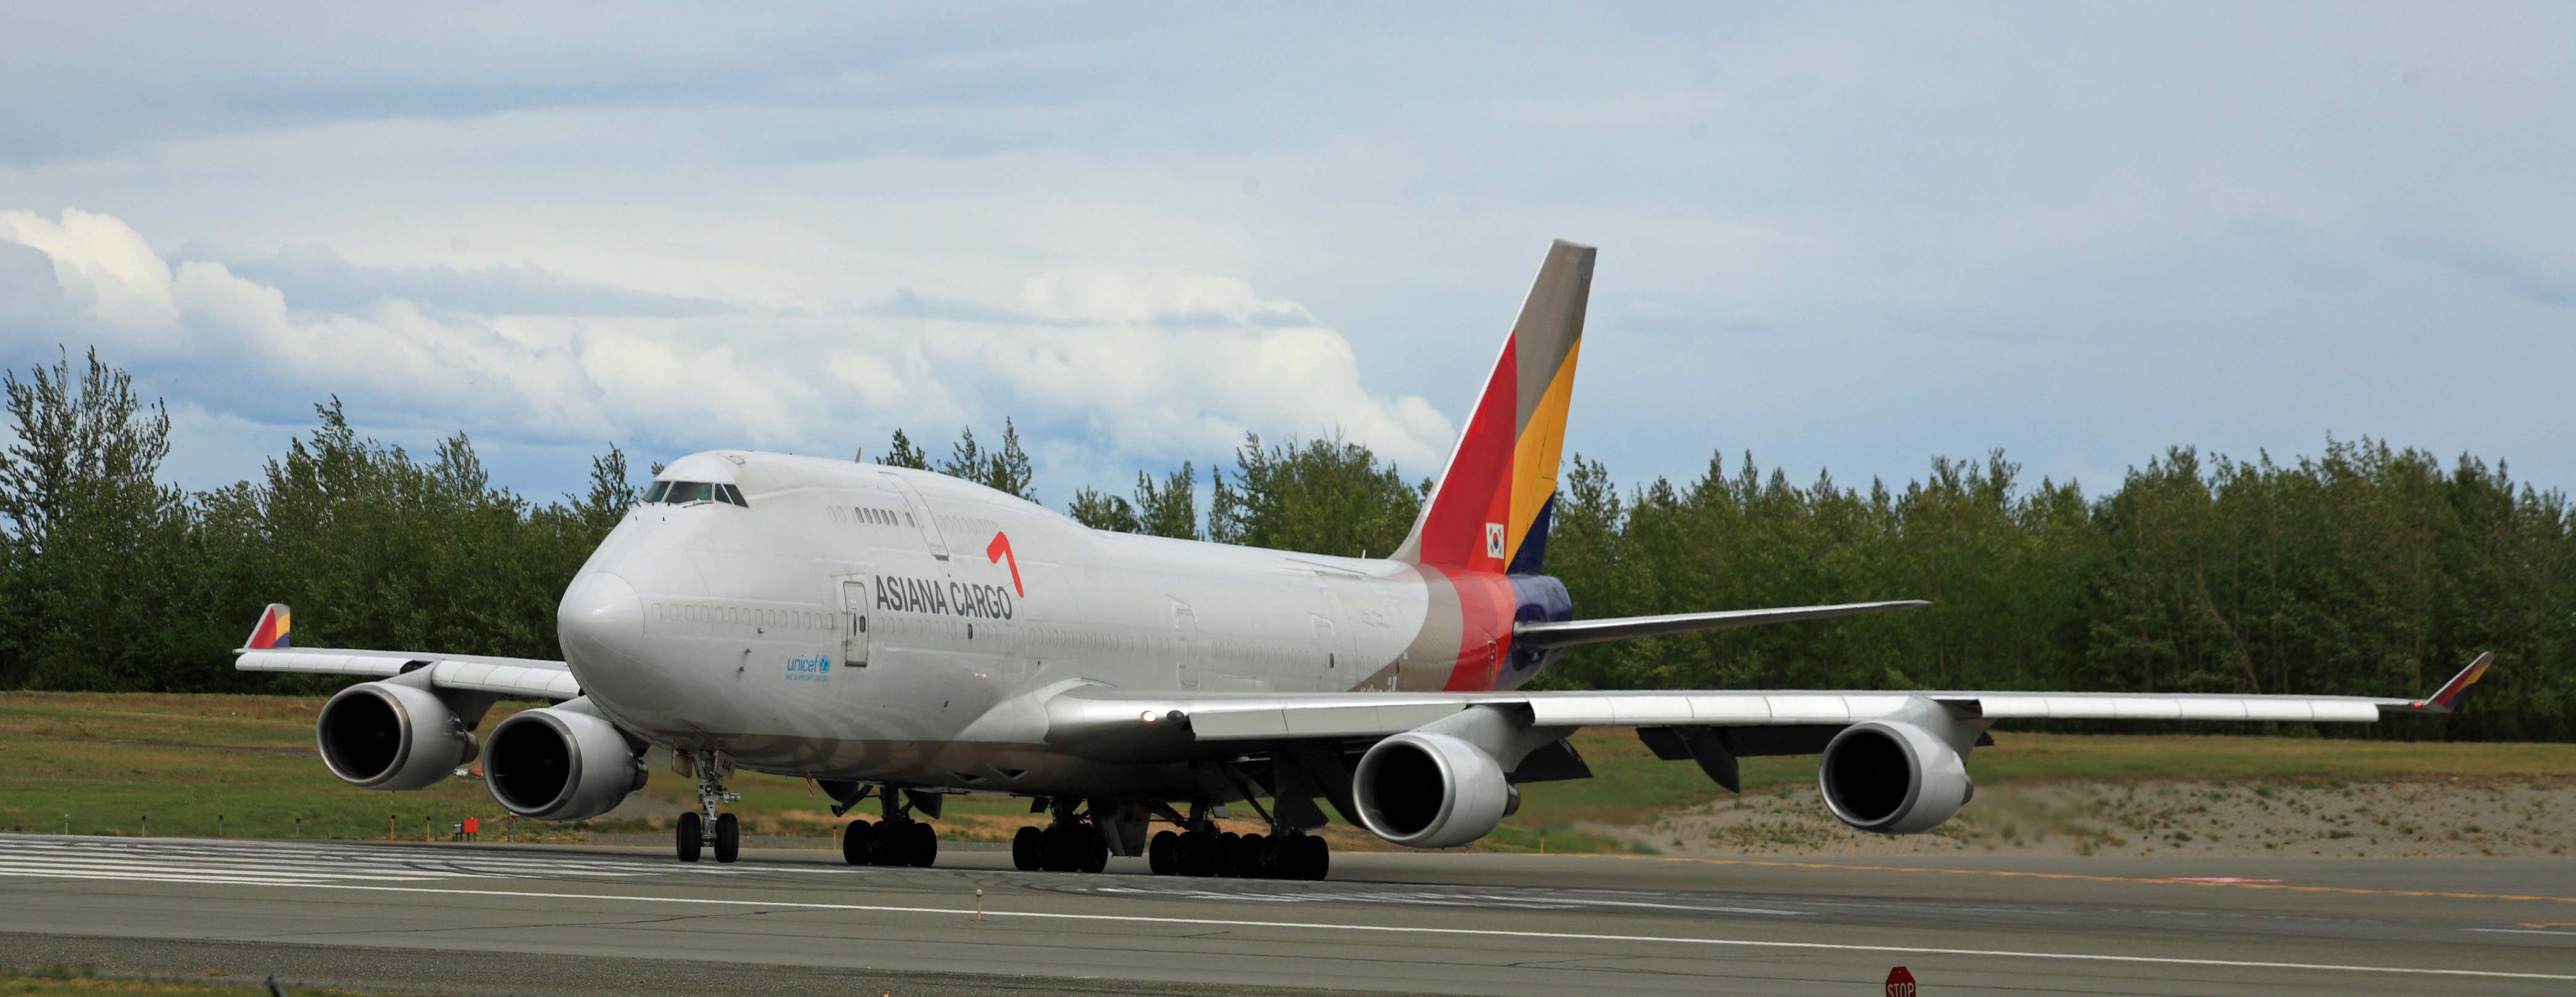 Asiana Airlines 747 Freighter turning on the active runway at ANC (6310587607)